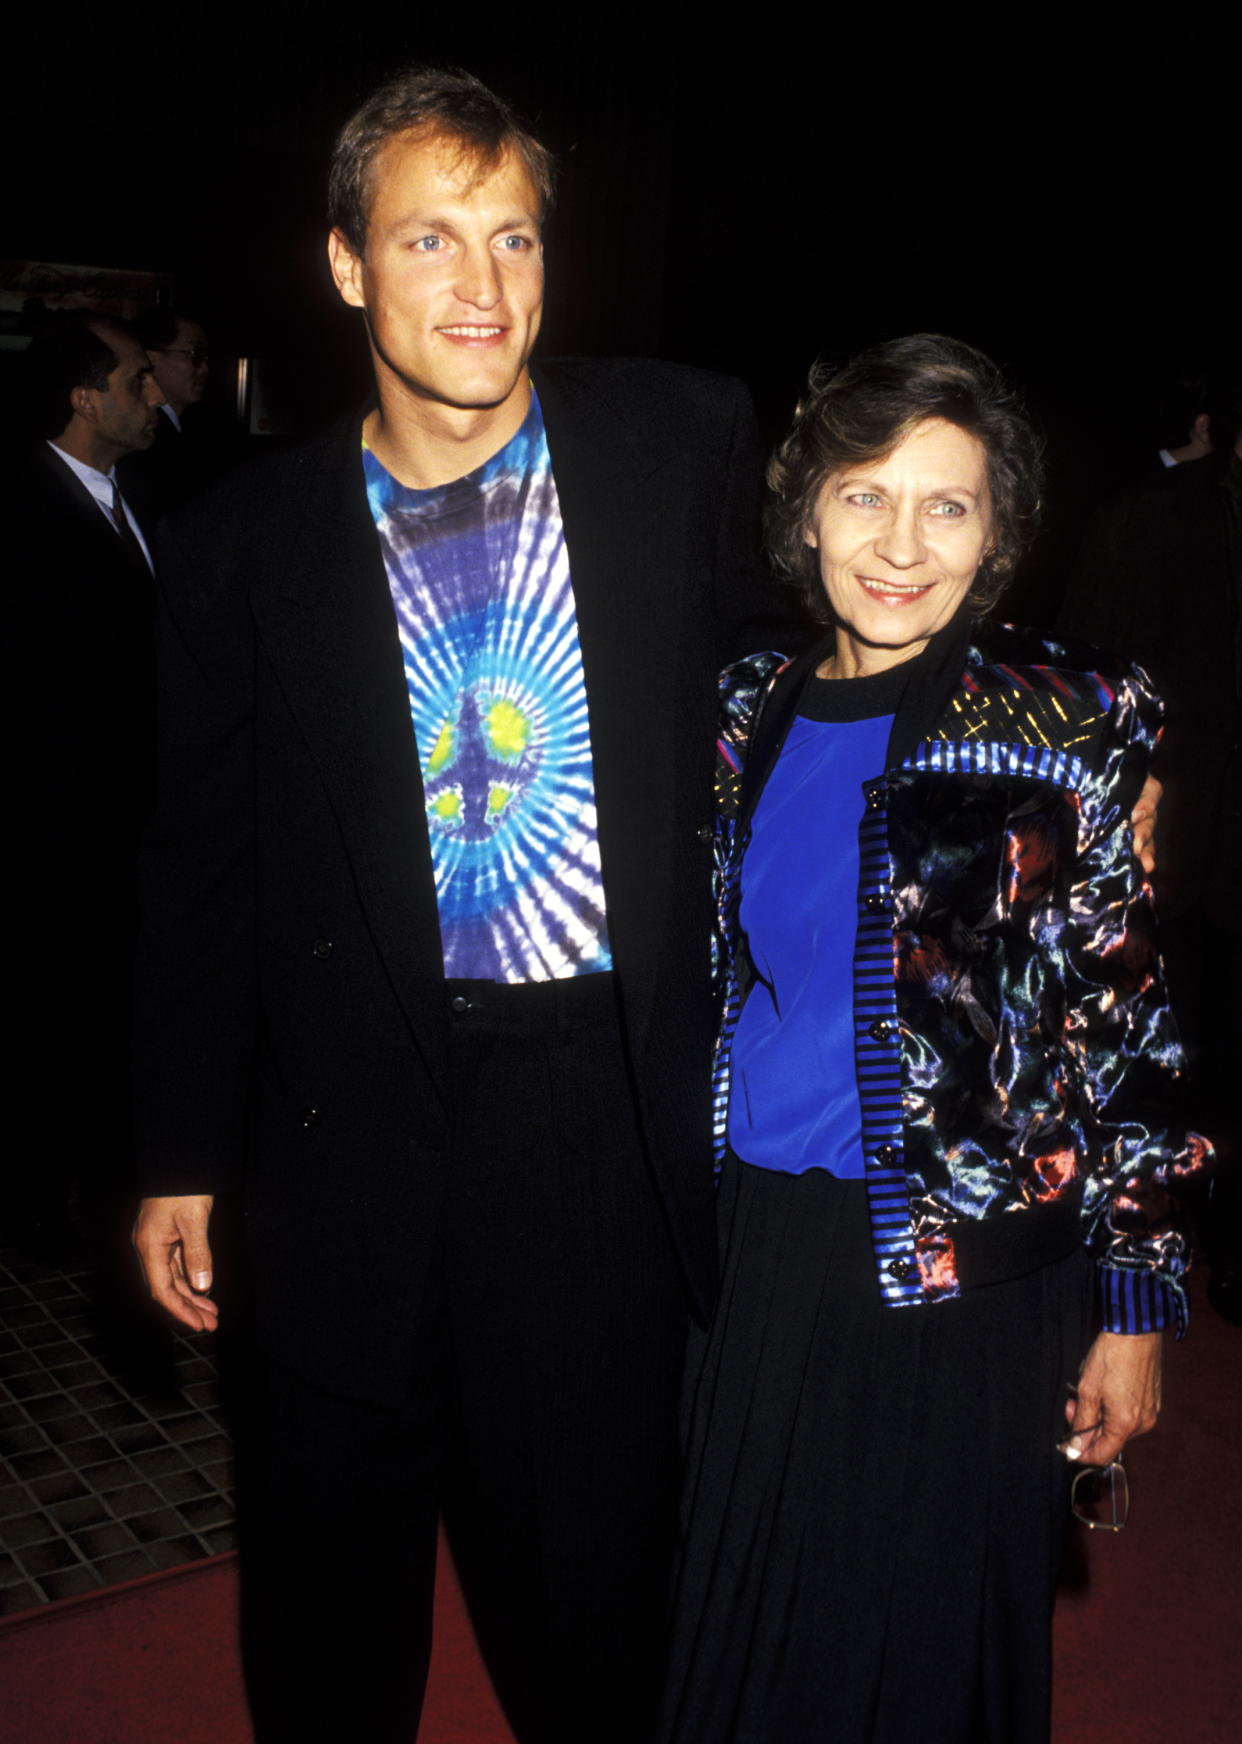 Woody Harrelson and mother Dianne Harrelson at the Premiere of 'White Man Can't Jump', Avco Center Cinema, Westwood. (Photo by Ron Galella/Ron Galella Collection via Getty Images)